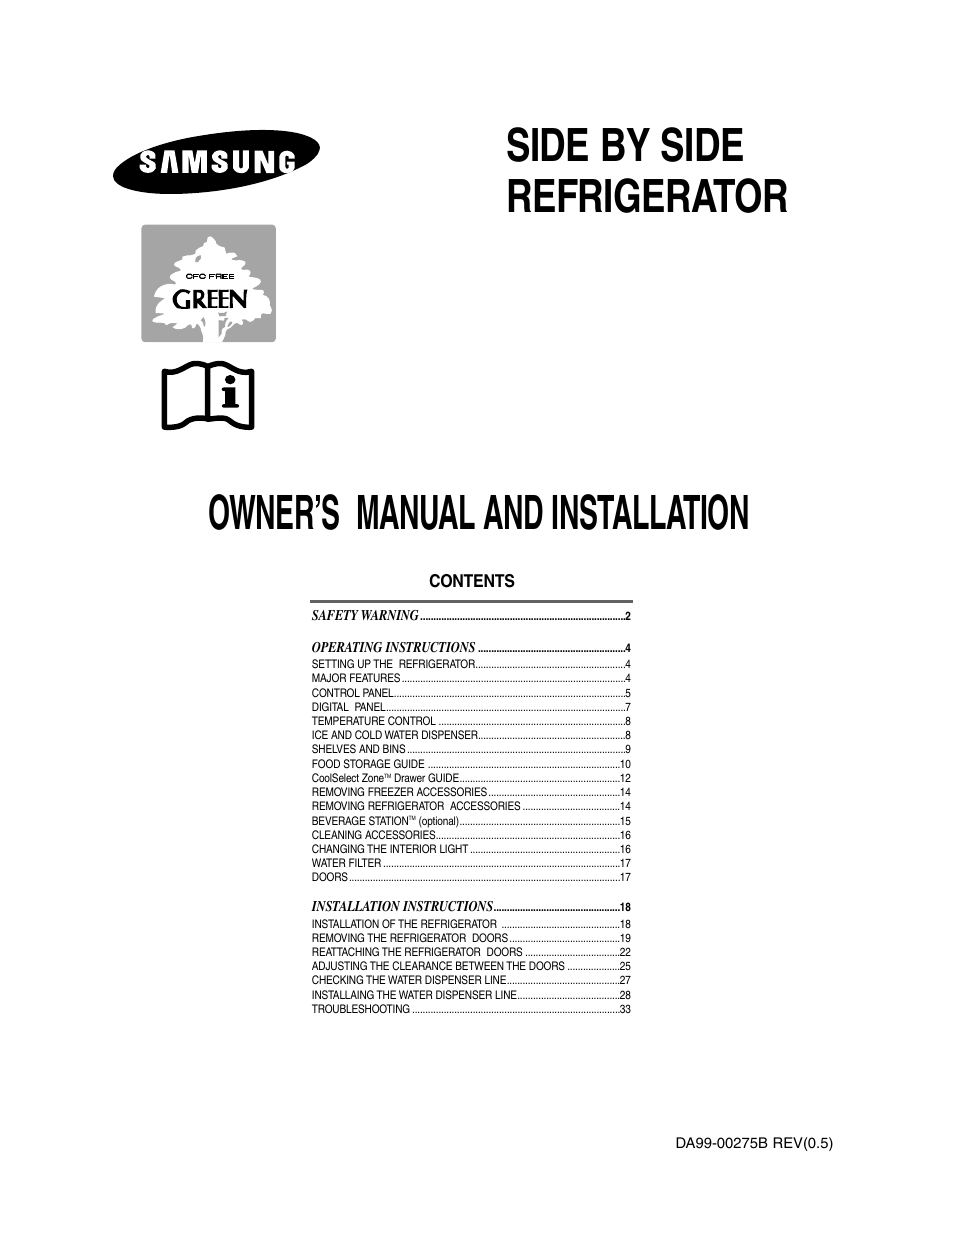 Samsung Model RS27KLMR User Manual | 36 pages | Also for: RS2555SL-XAC